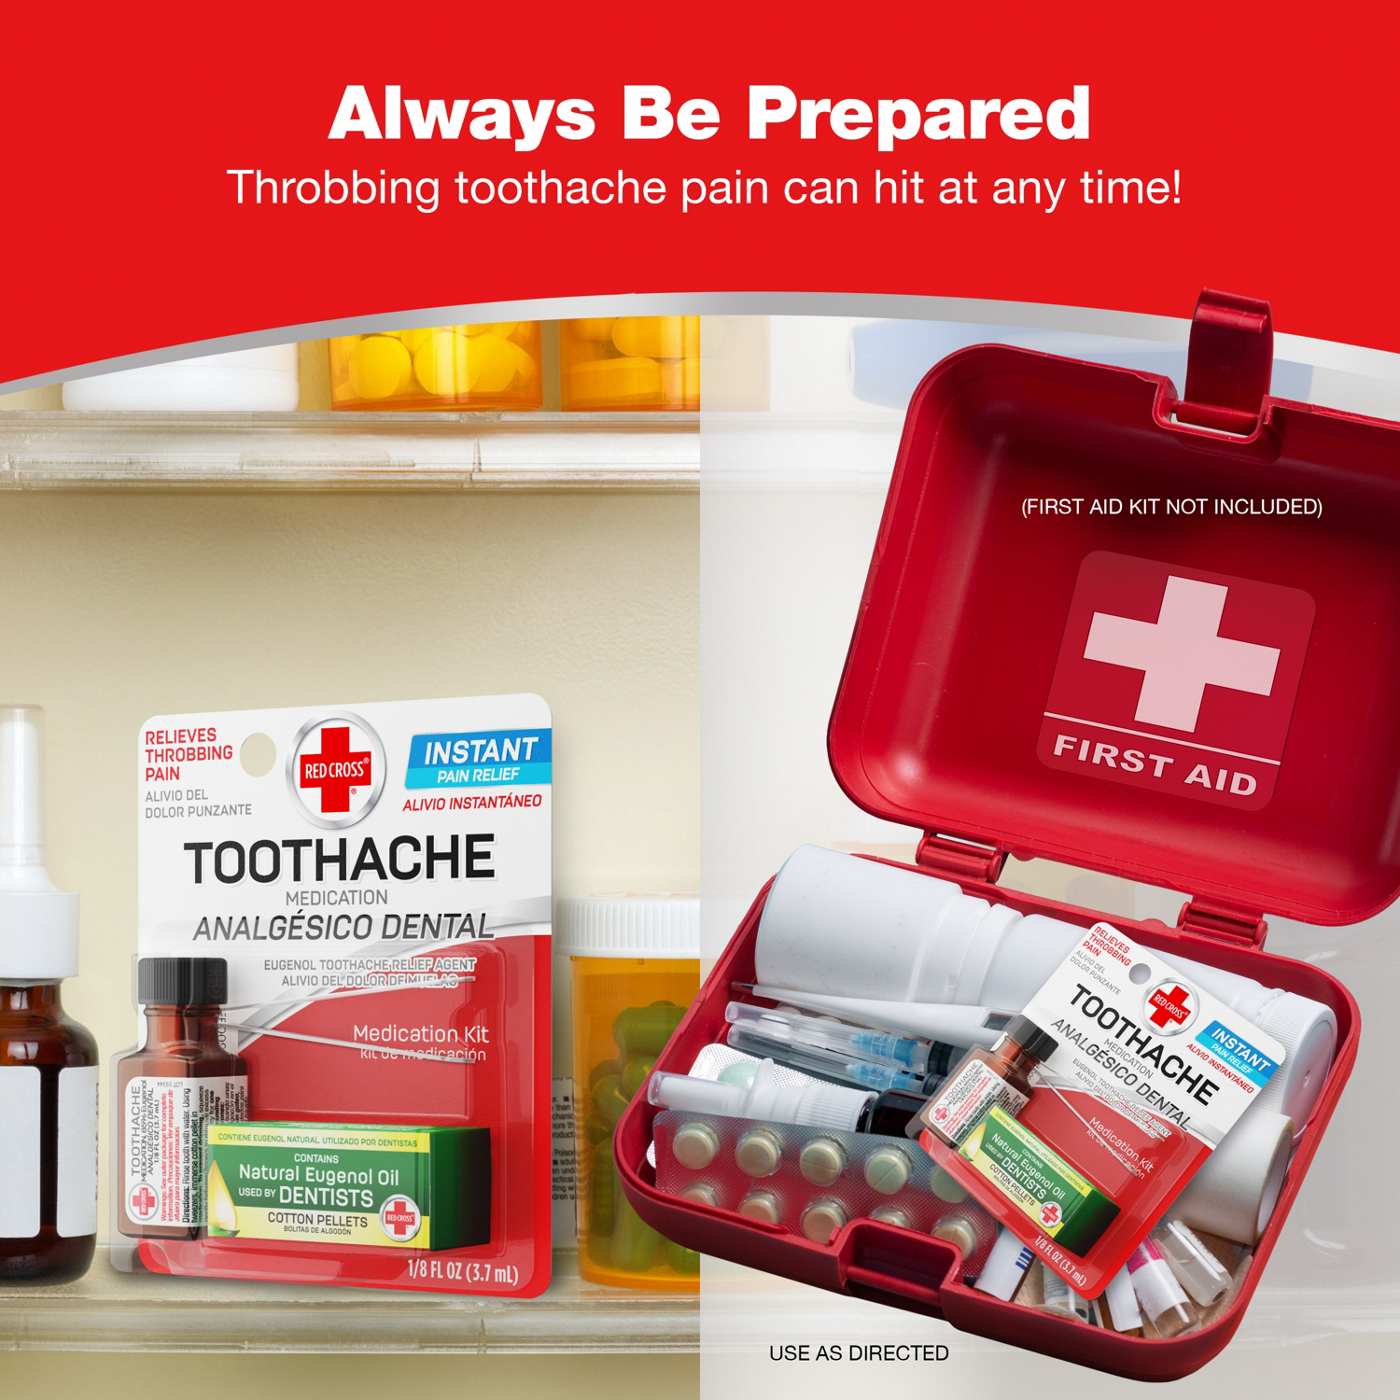 Red Cross Toothache Medication Kit; image 6 of 6